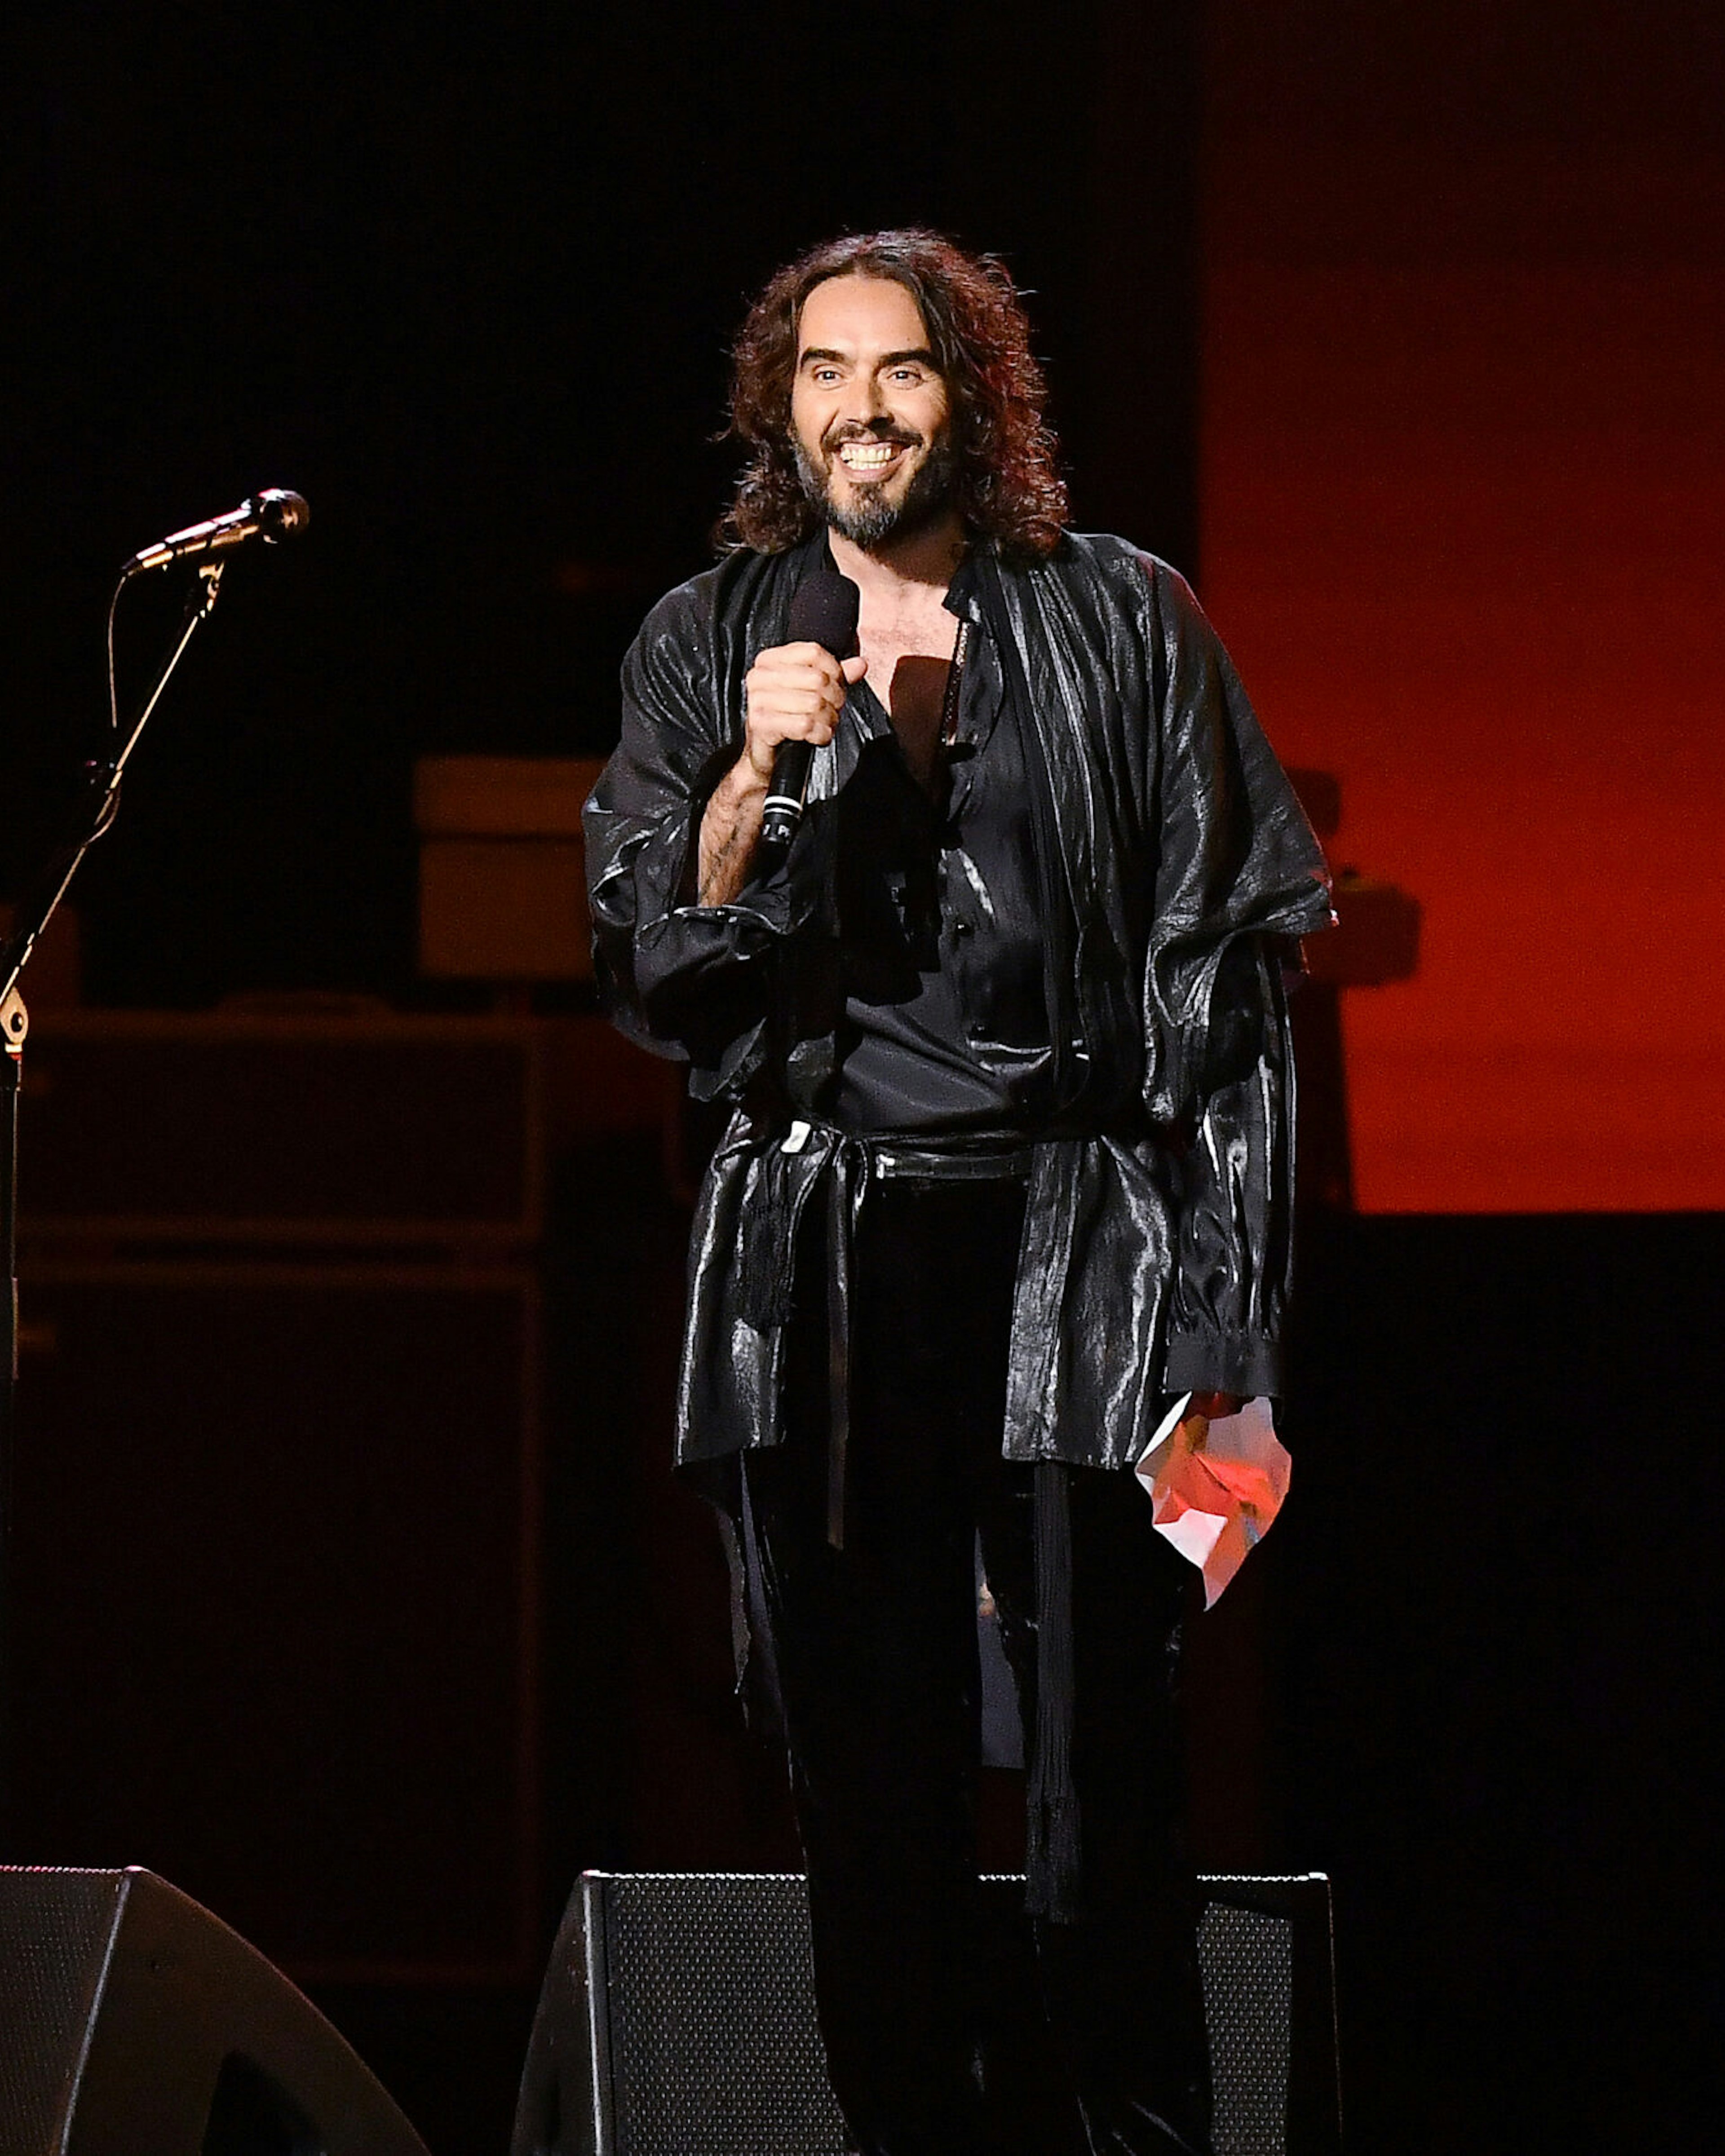 LOS ANGELES, CALIFORNIA - JANUARY 24: Host Russell Brand speaks onstage during MusiCares Person of the Year honoring Aerosmith at West Hall at Los Angeles Convention Center on January 24, 2020 in Los Angeles, California. (Photo by Amy Sussman/Getty Images)